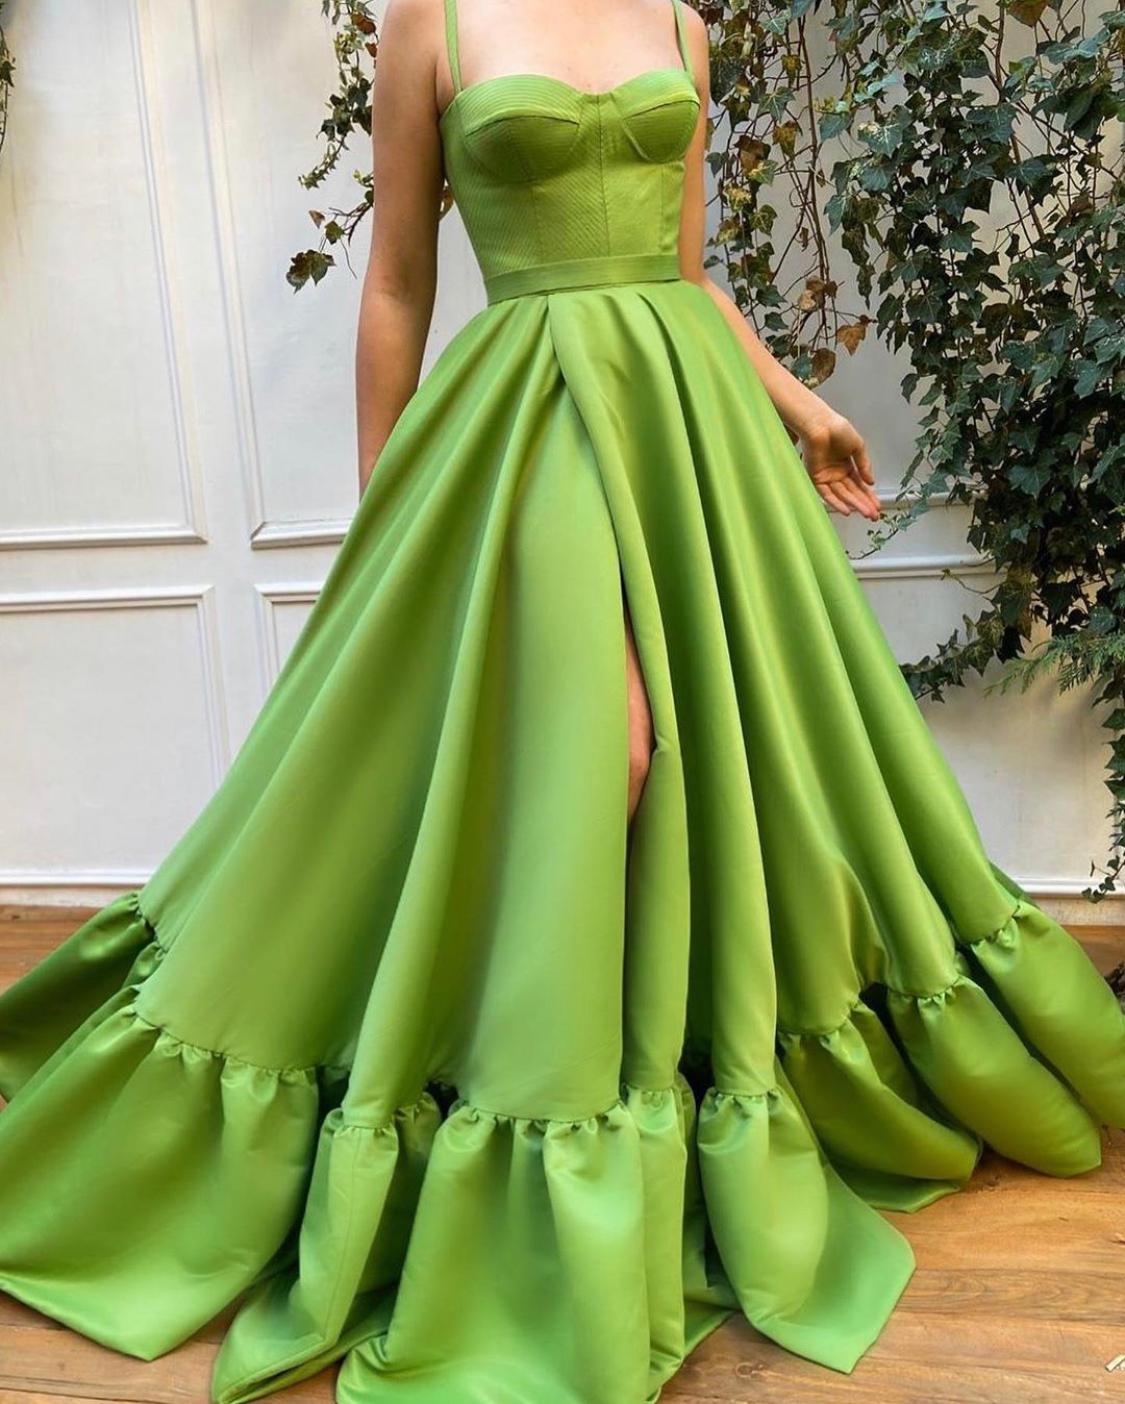 Green A-Line dress with spaghetti straps